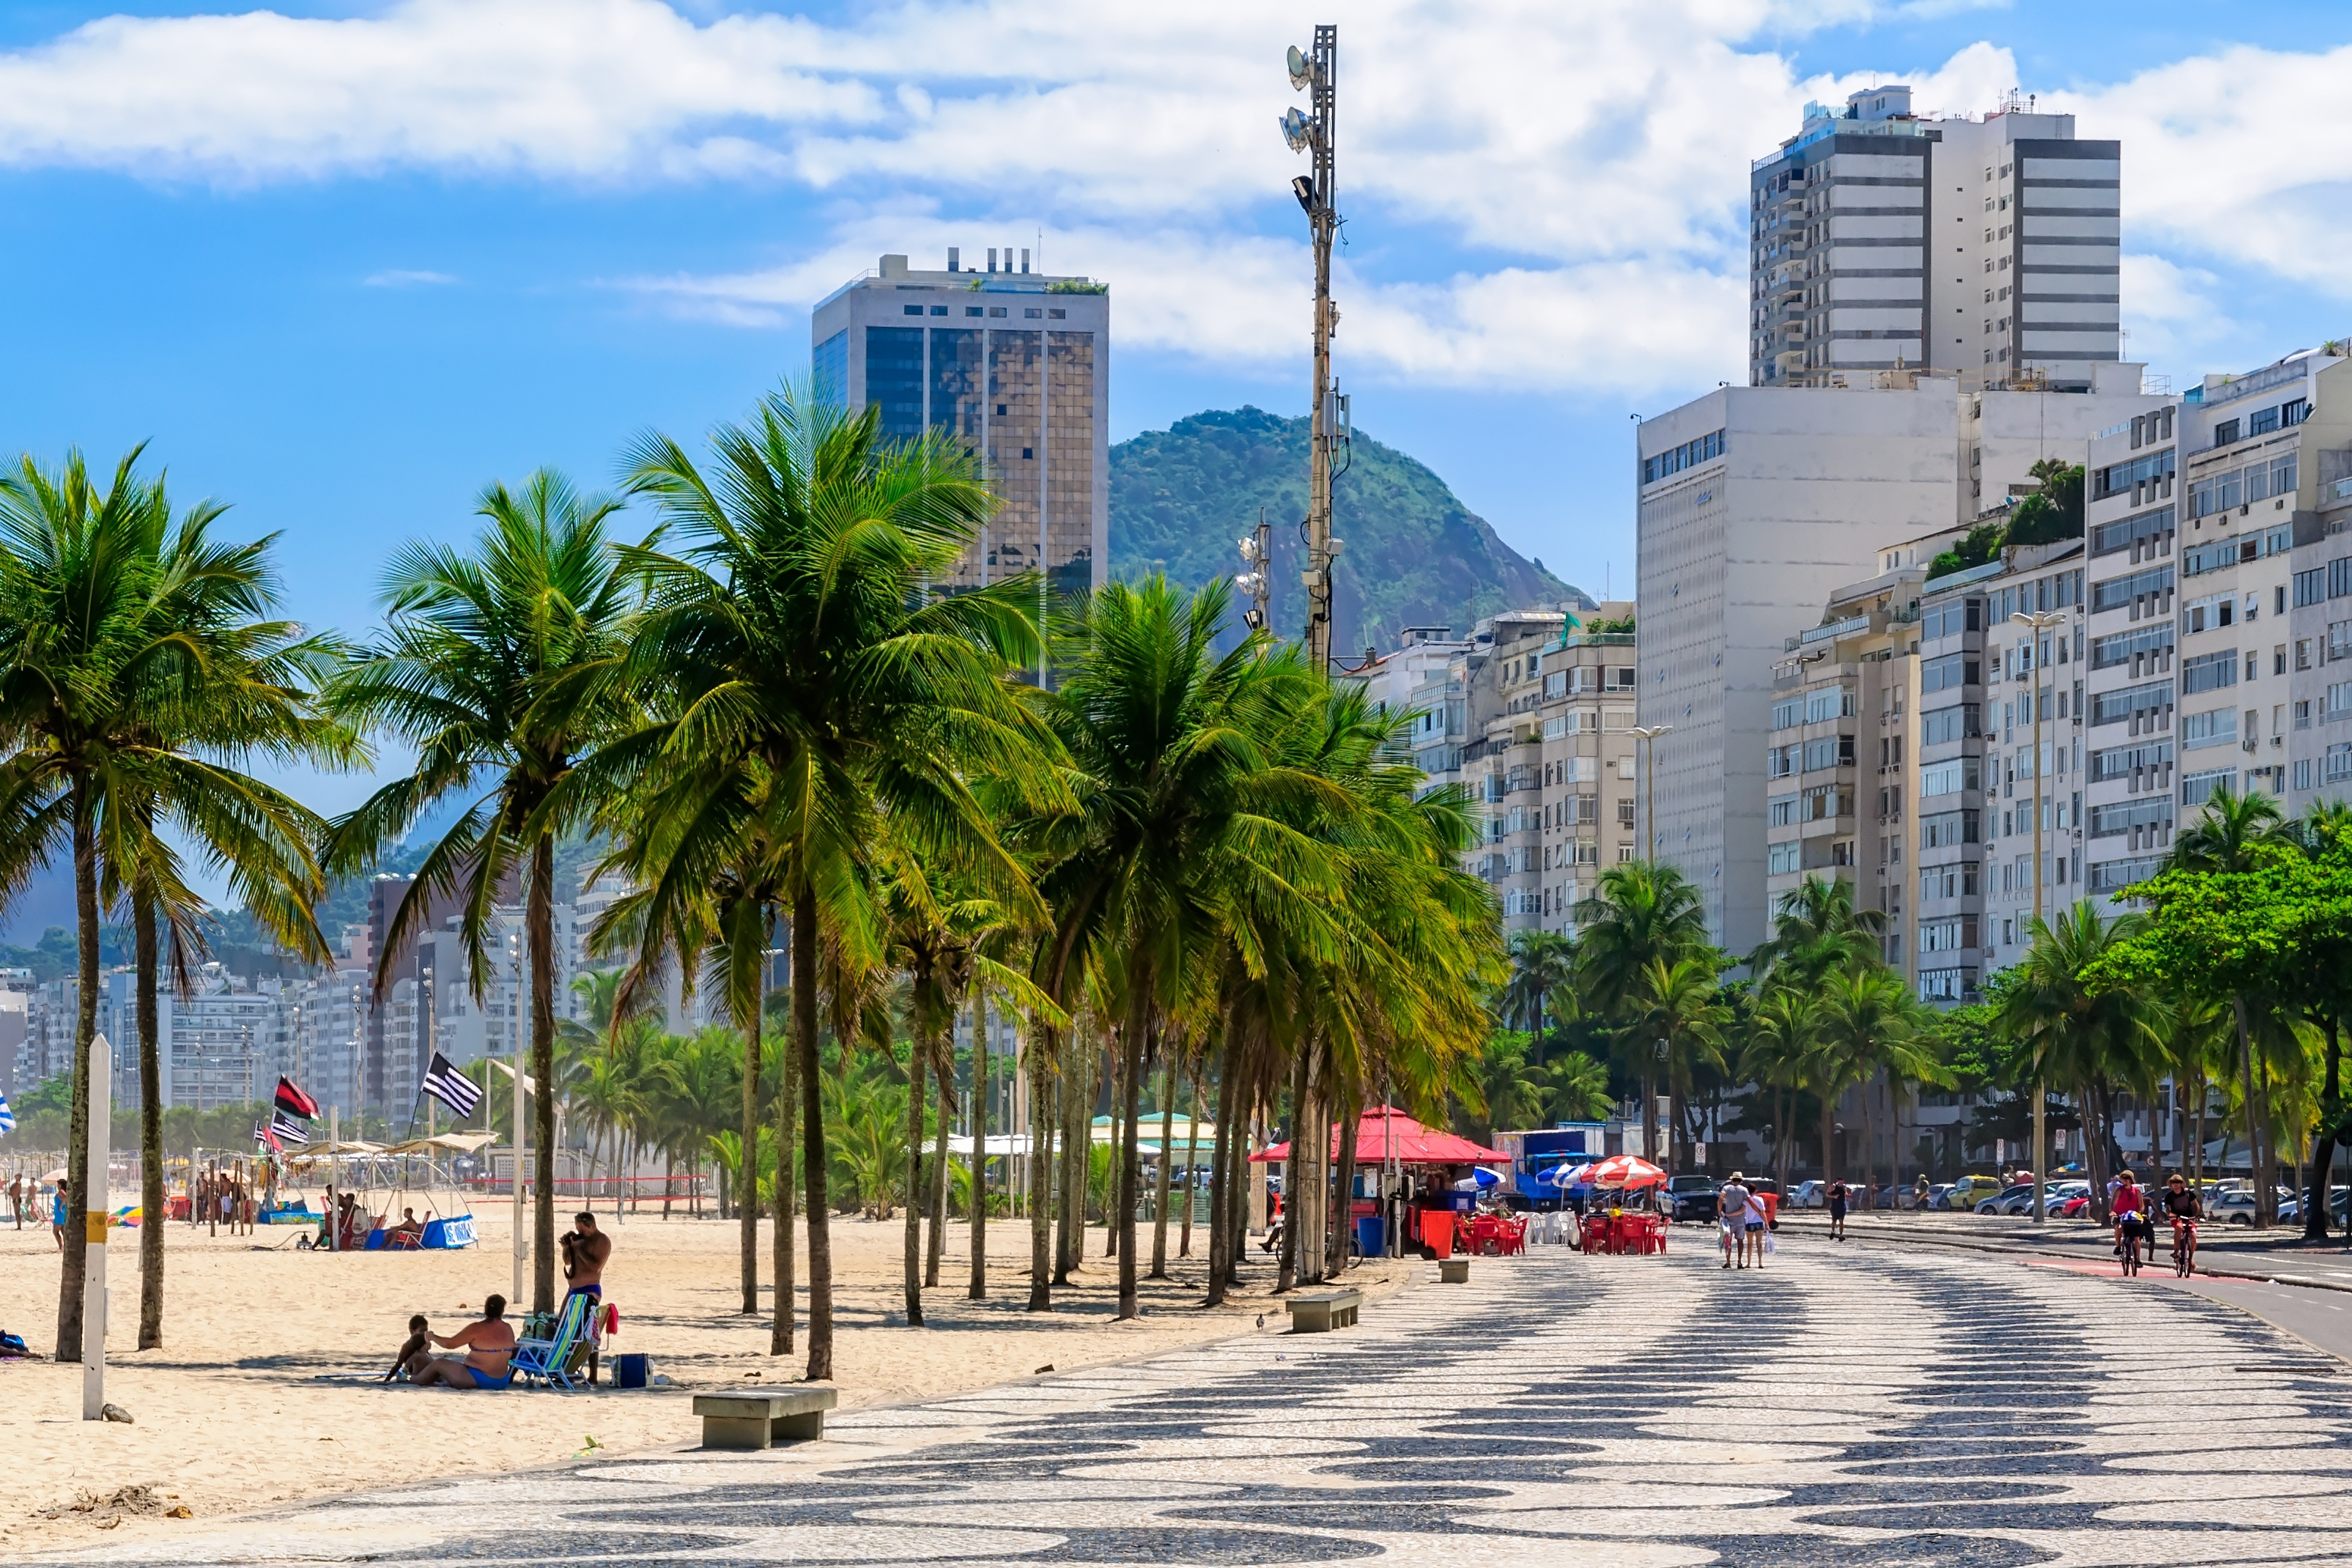 Brazil's residence permit allows foreigners to live in the warm country